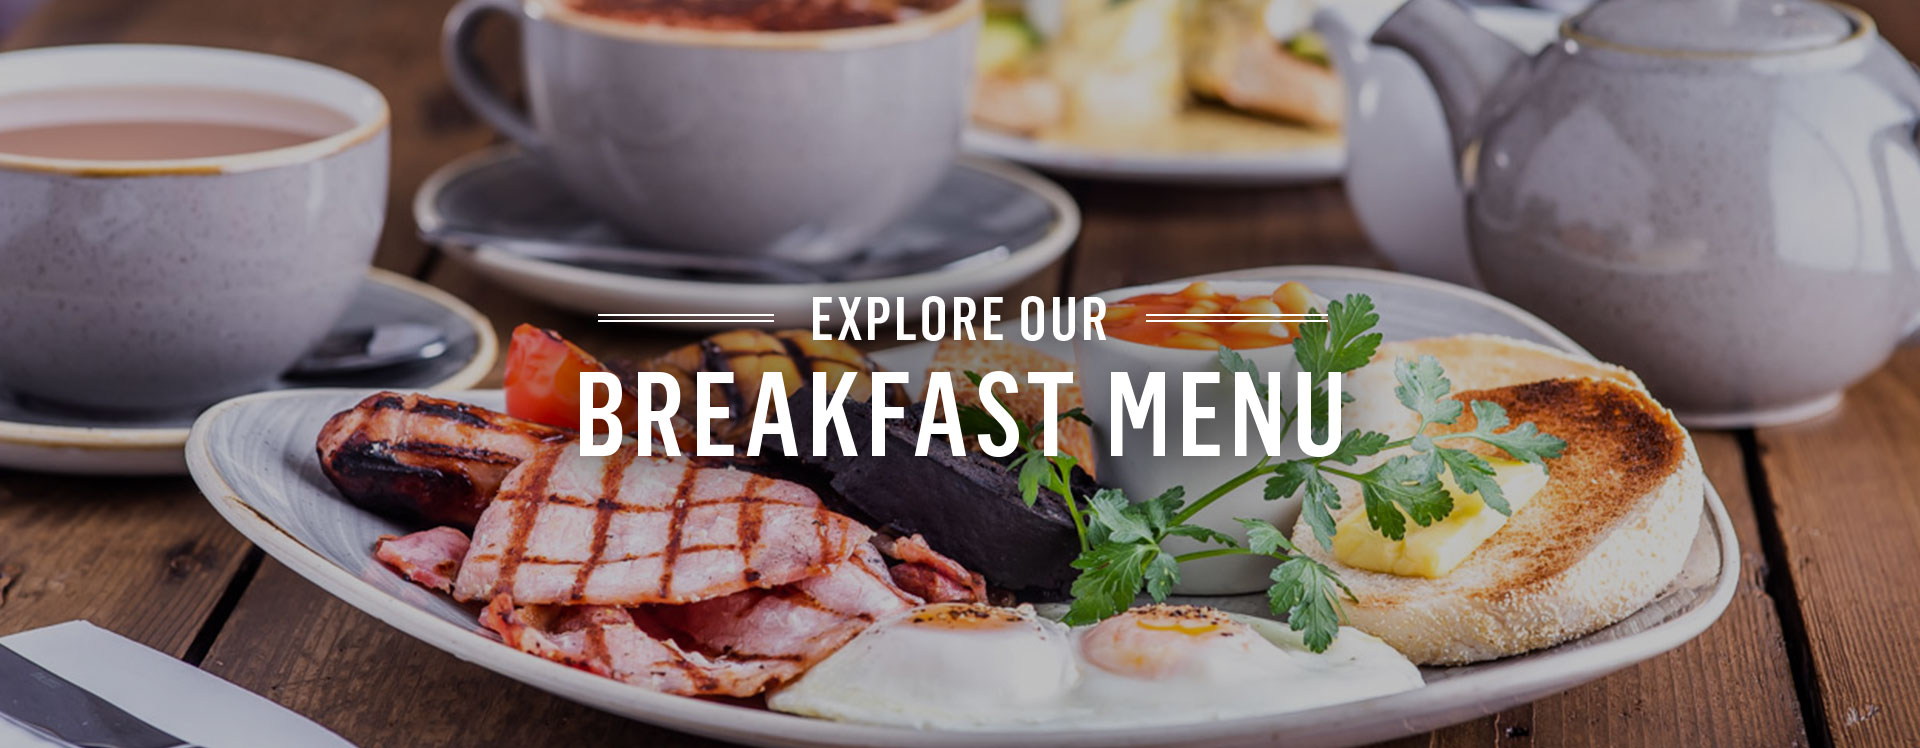 Breakfast at The Cross Keys - Book a table